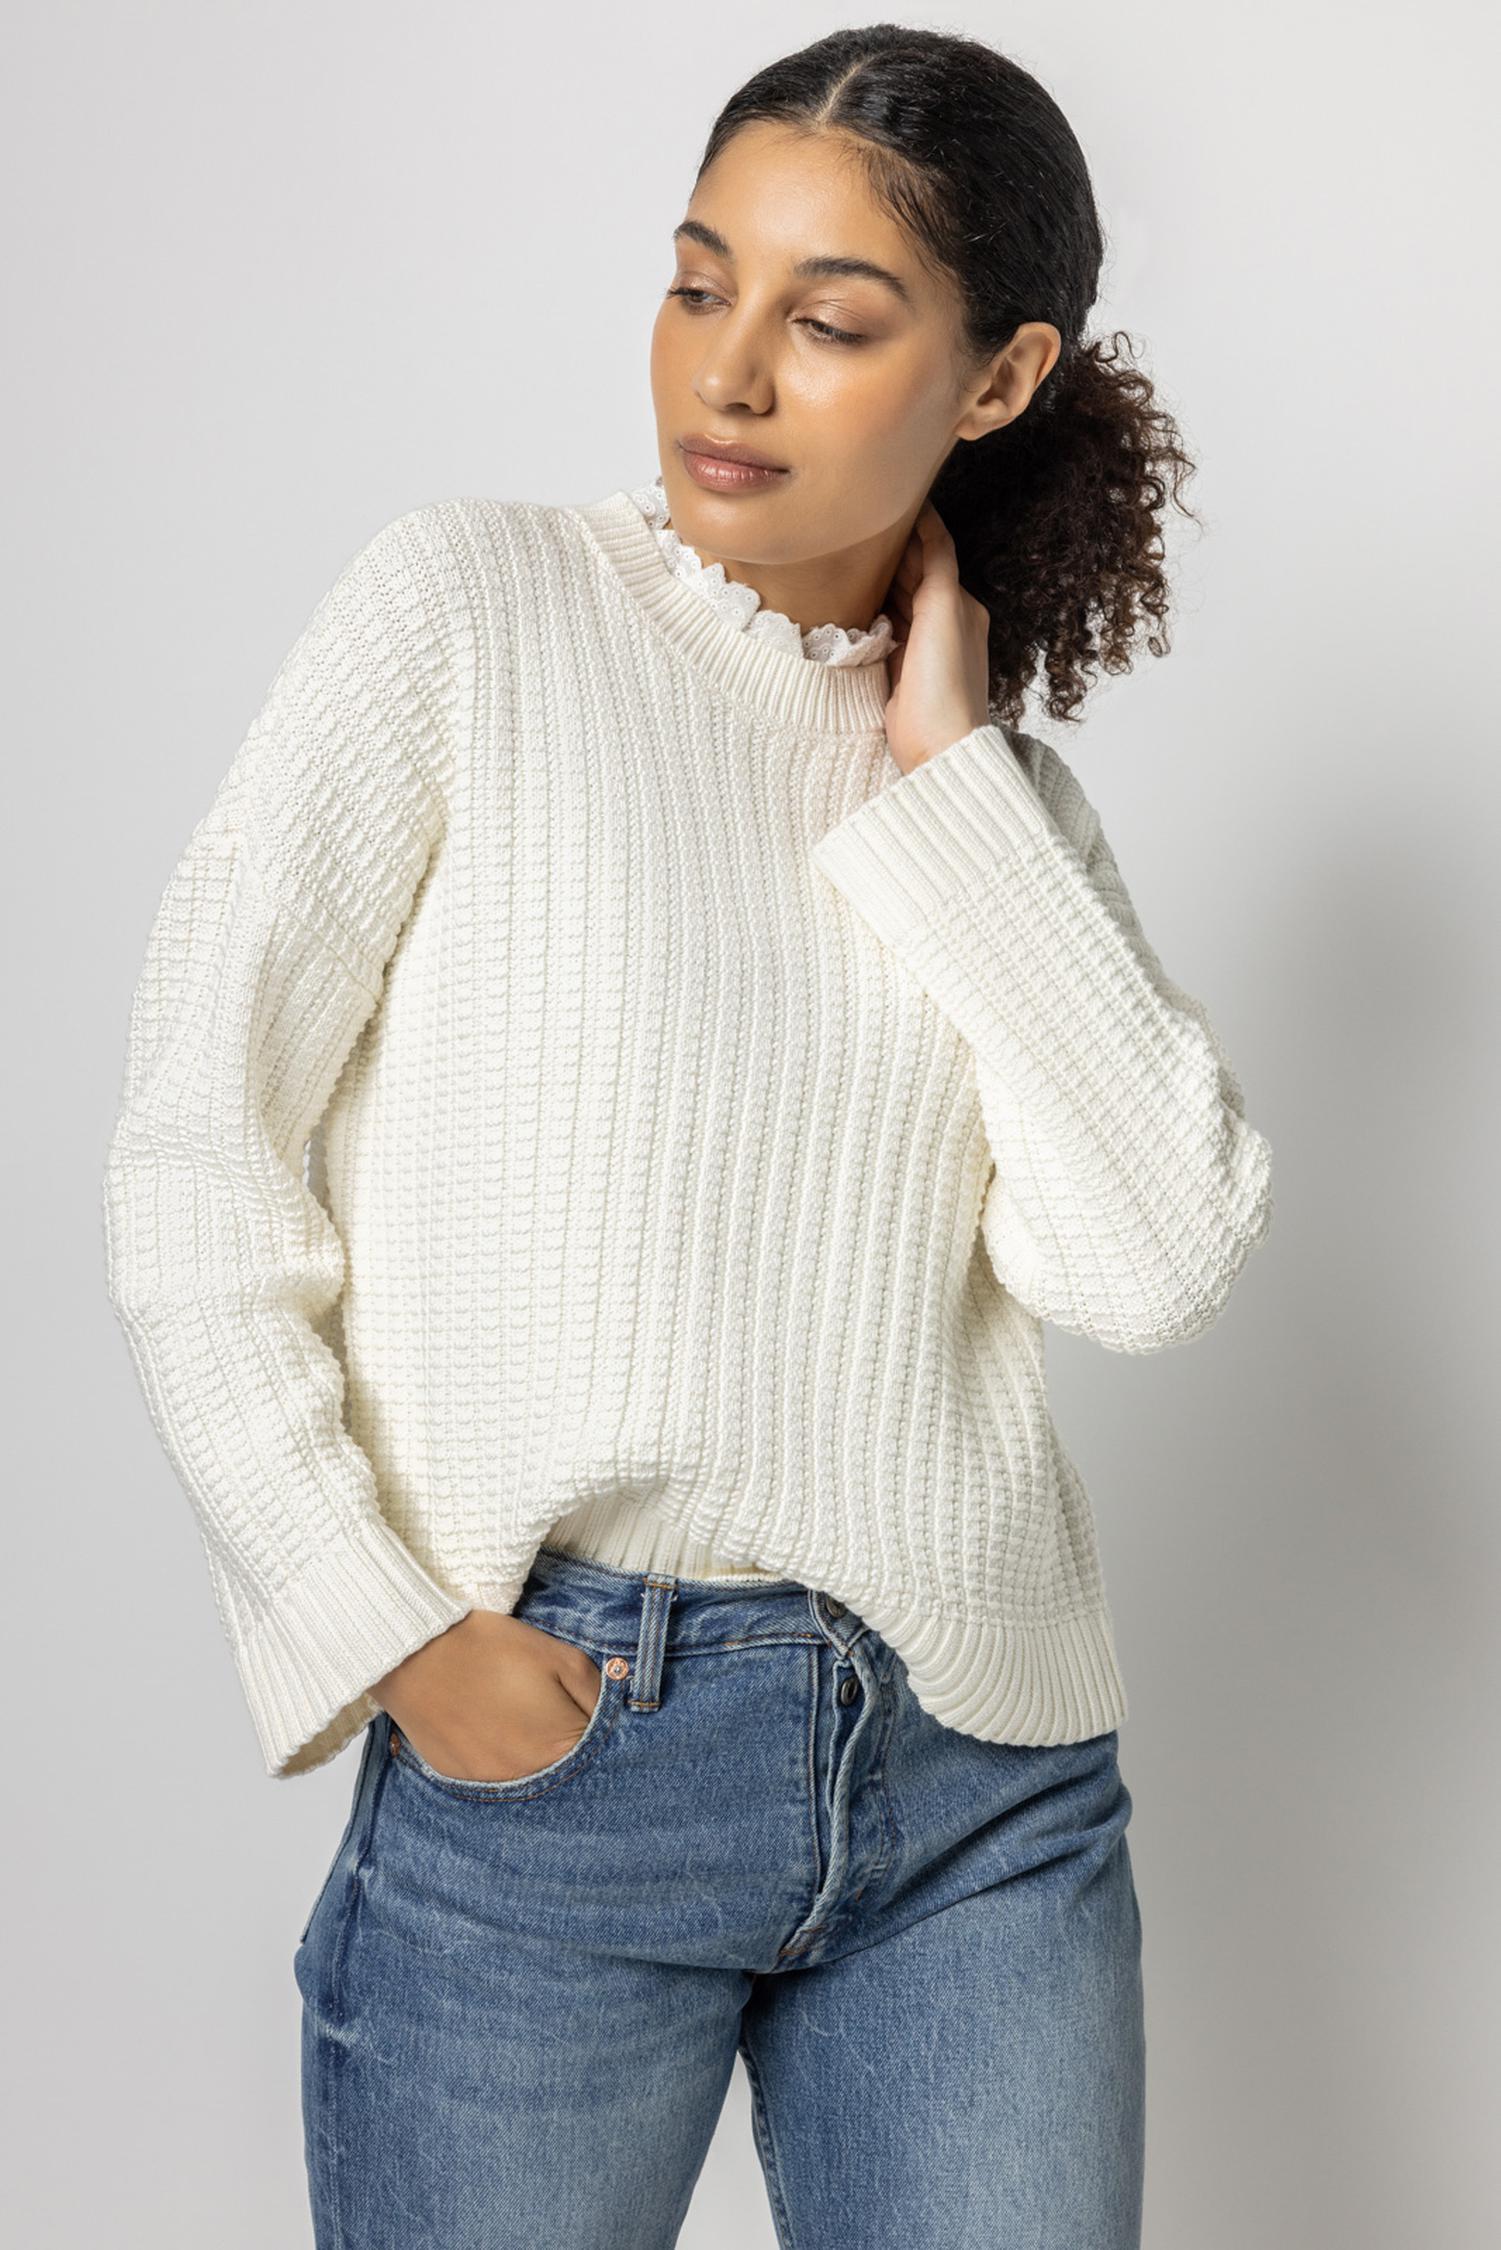 Eyelet Trimmed Crewneck Sweater by Lilla P